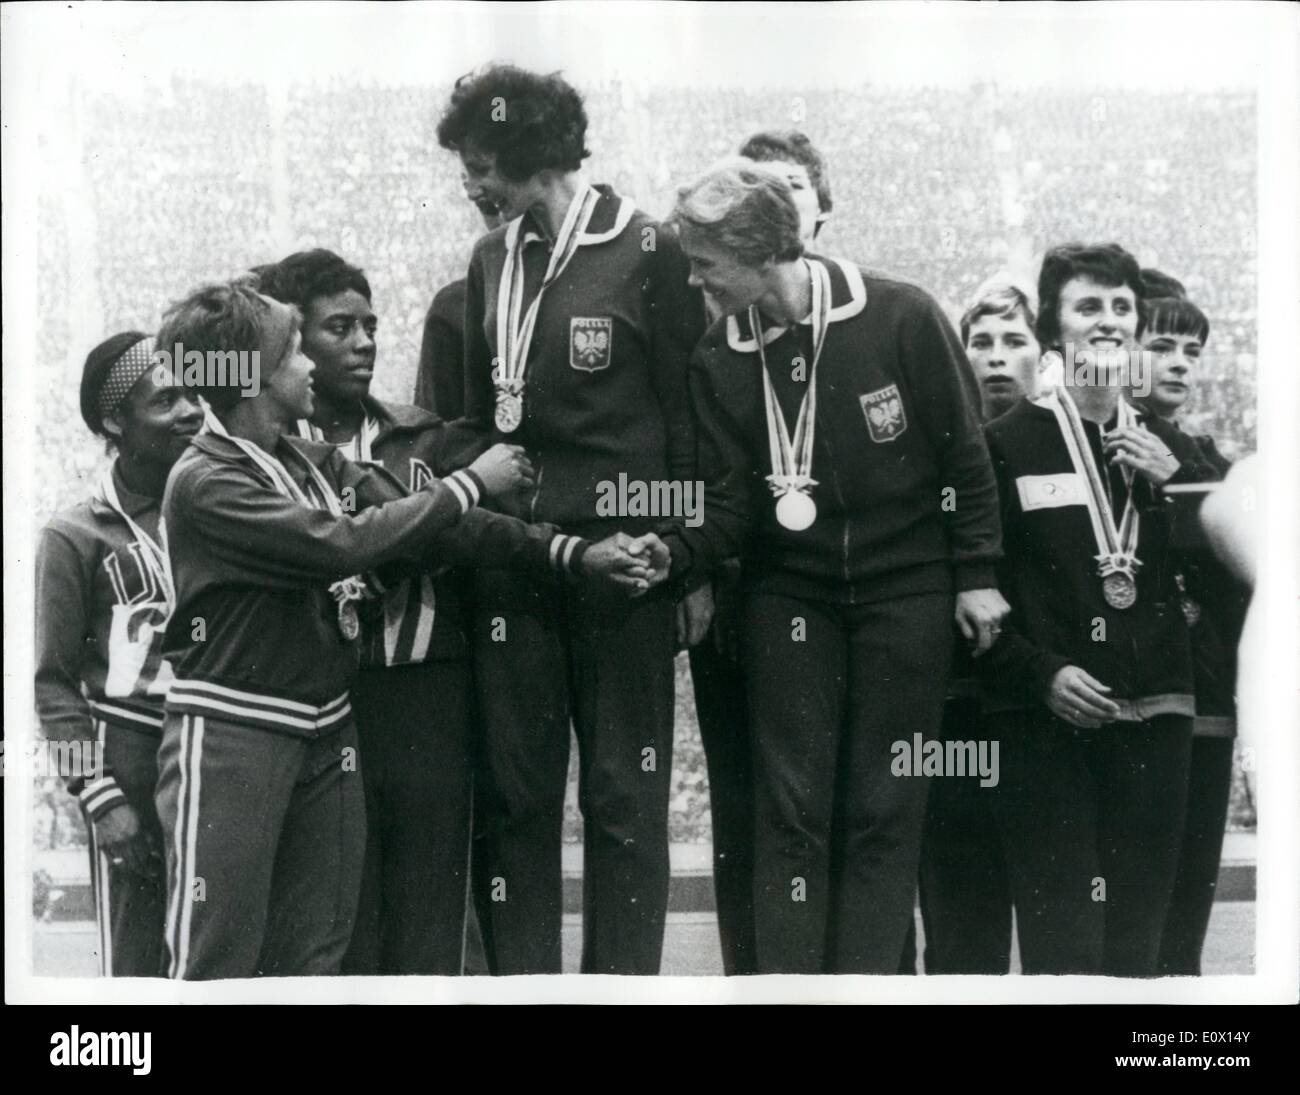 Oct. 10, 1964 - Olympic games in Tokyo. U.S. win the women's 4 x 100 metres relay. Photo shows winners of the Women's 4 x 100 Metres Relay Final, congratulate each other on the winner's rostrum after the presentation of medals. In centre is the winning United States team. On left is the Polish team, who were second, and on right, the British team, who were third. Stock Photo